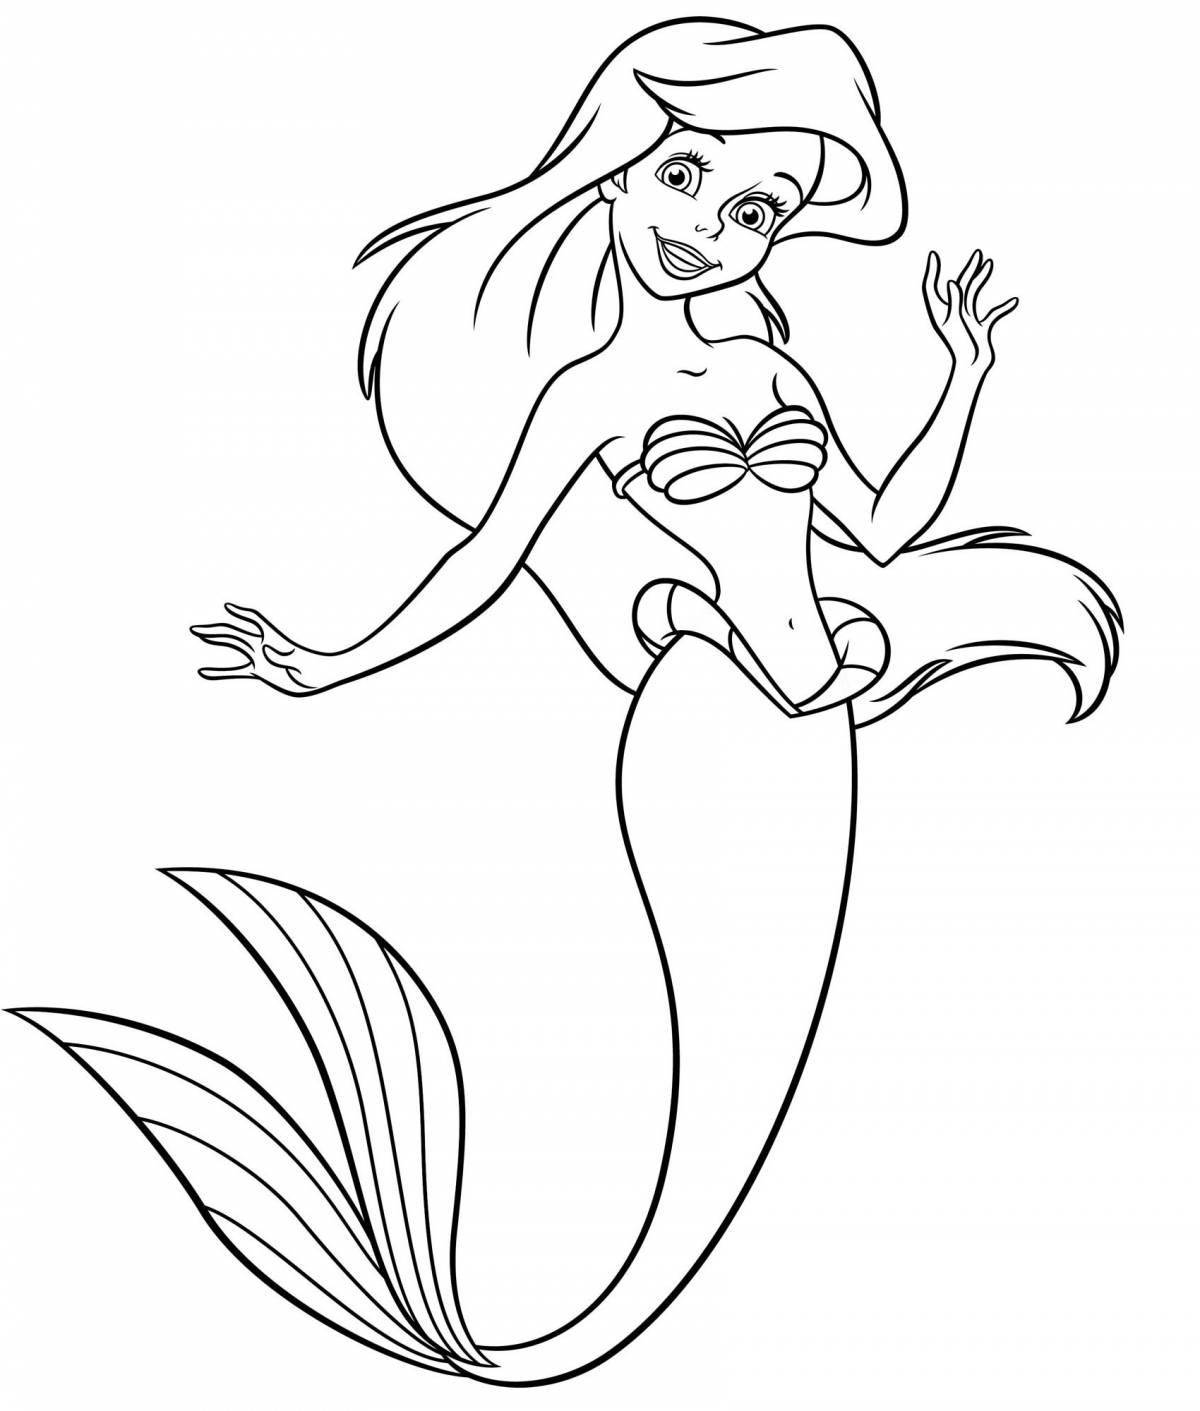 Adorable mermaid coloring book for 4-5 year olds